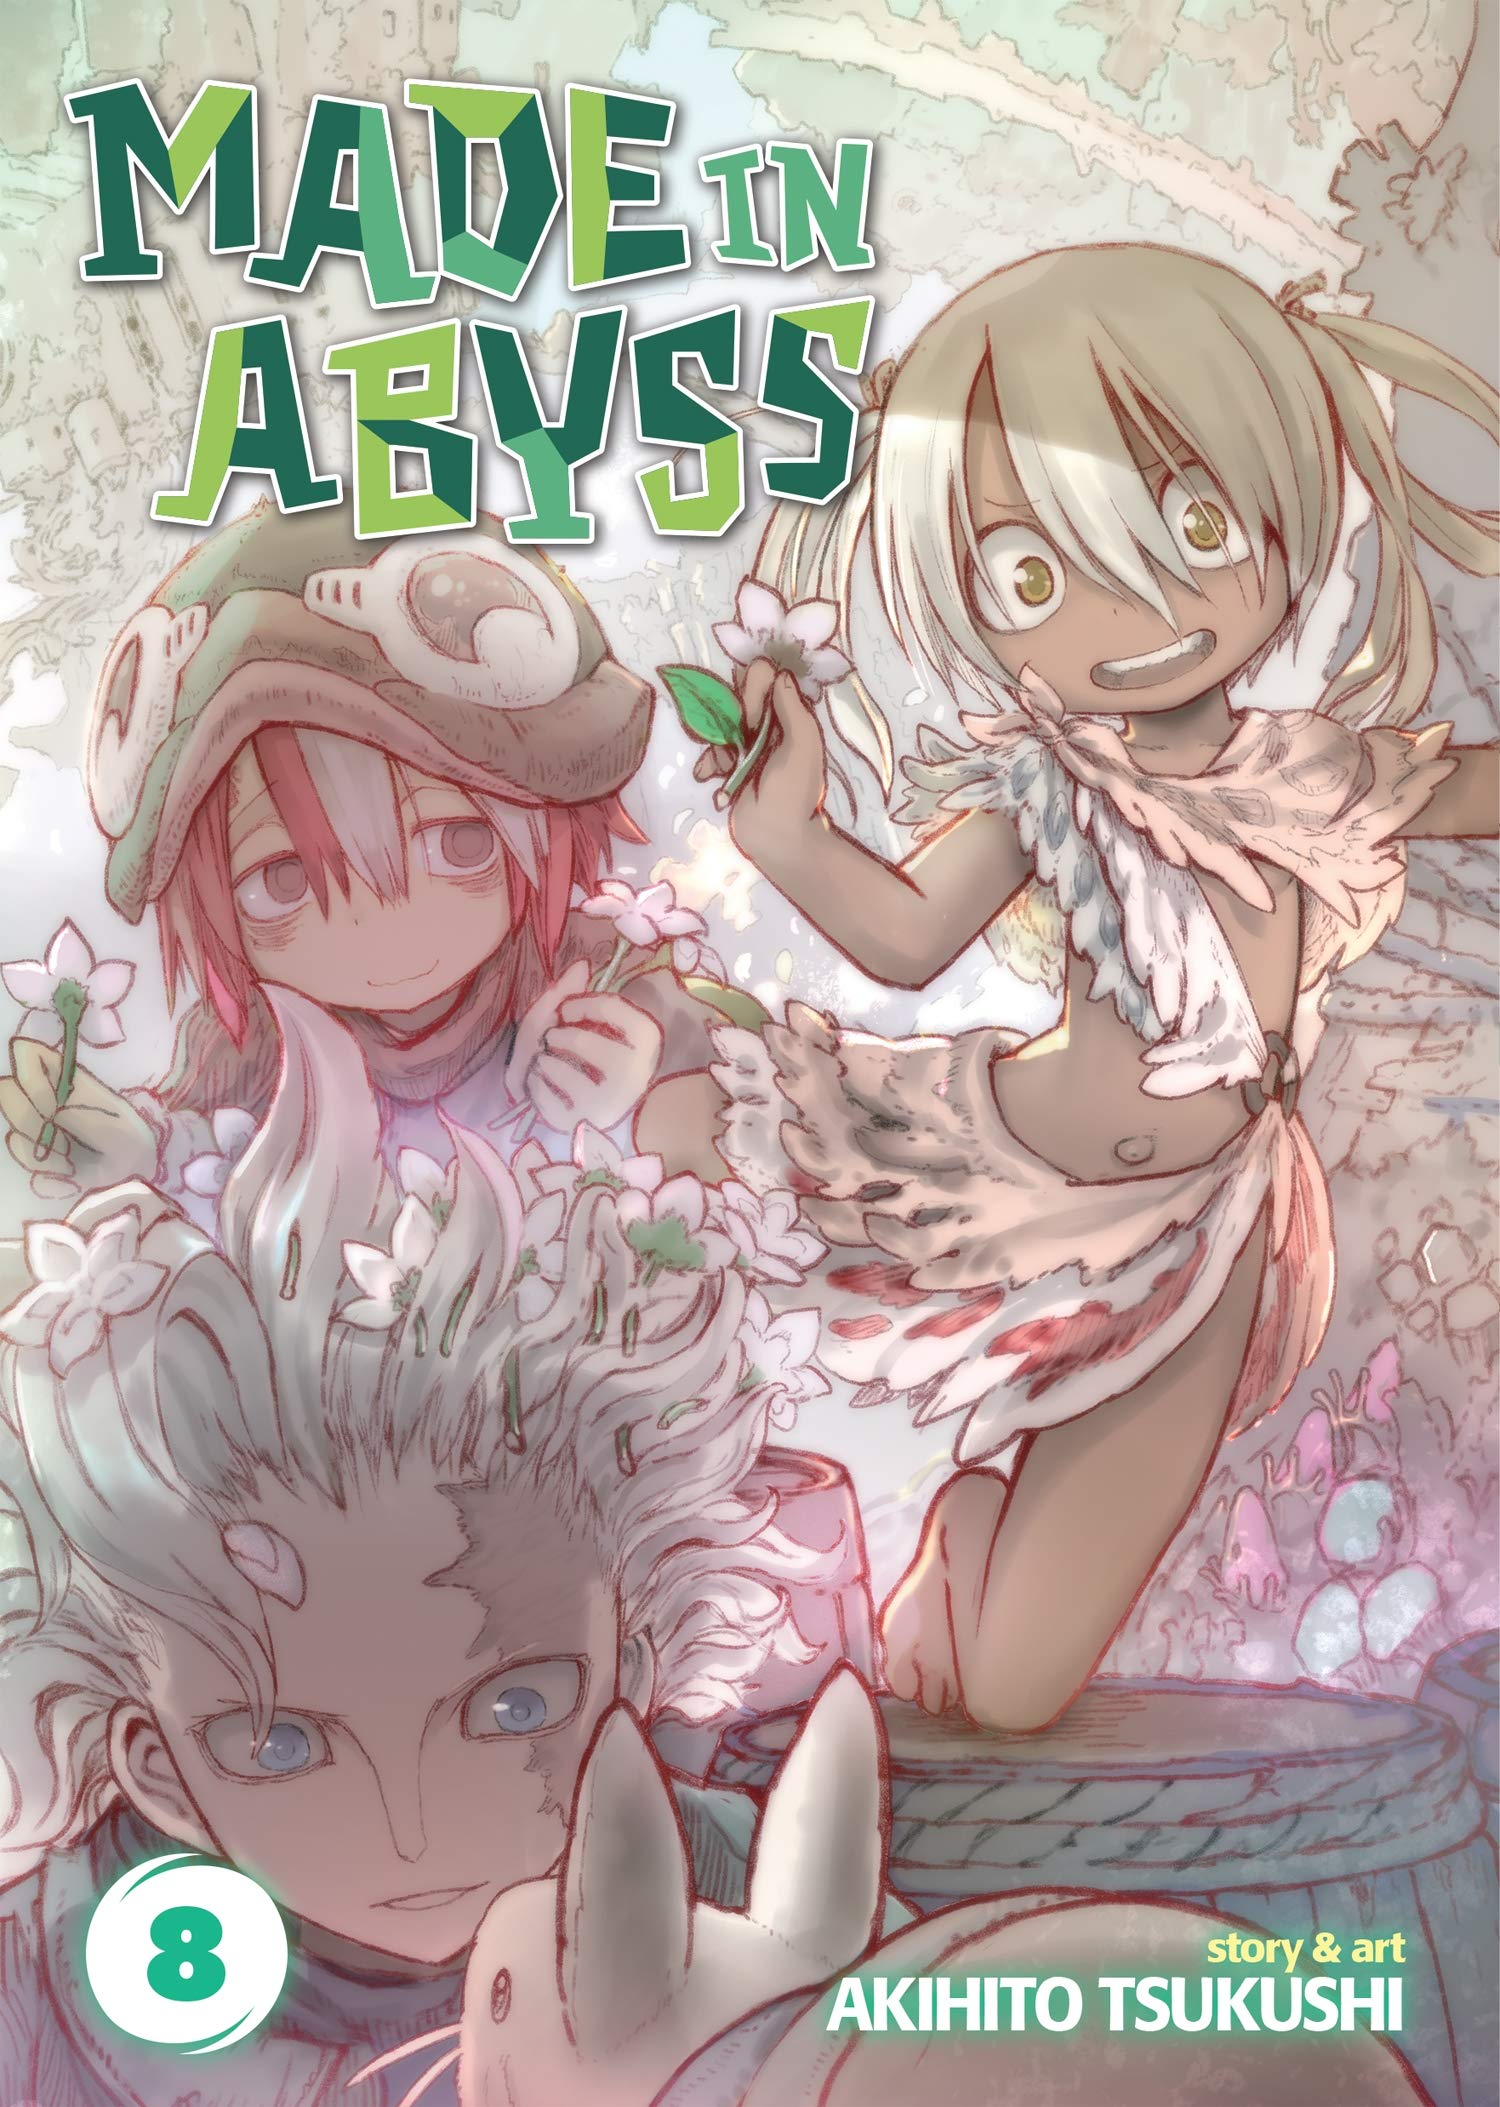 Made in Abyss Chapter 002, Made in Abyss Wiki